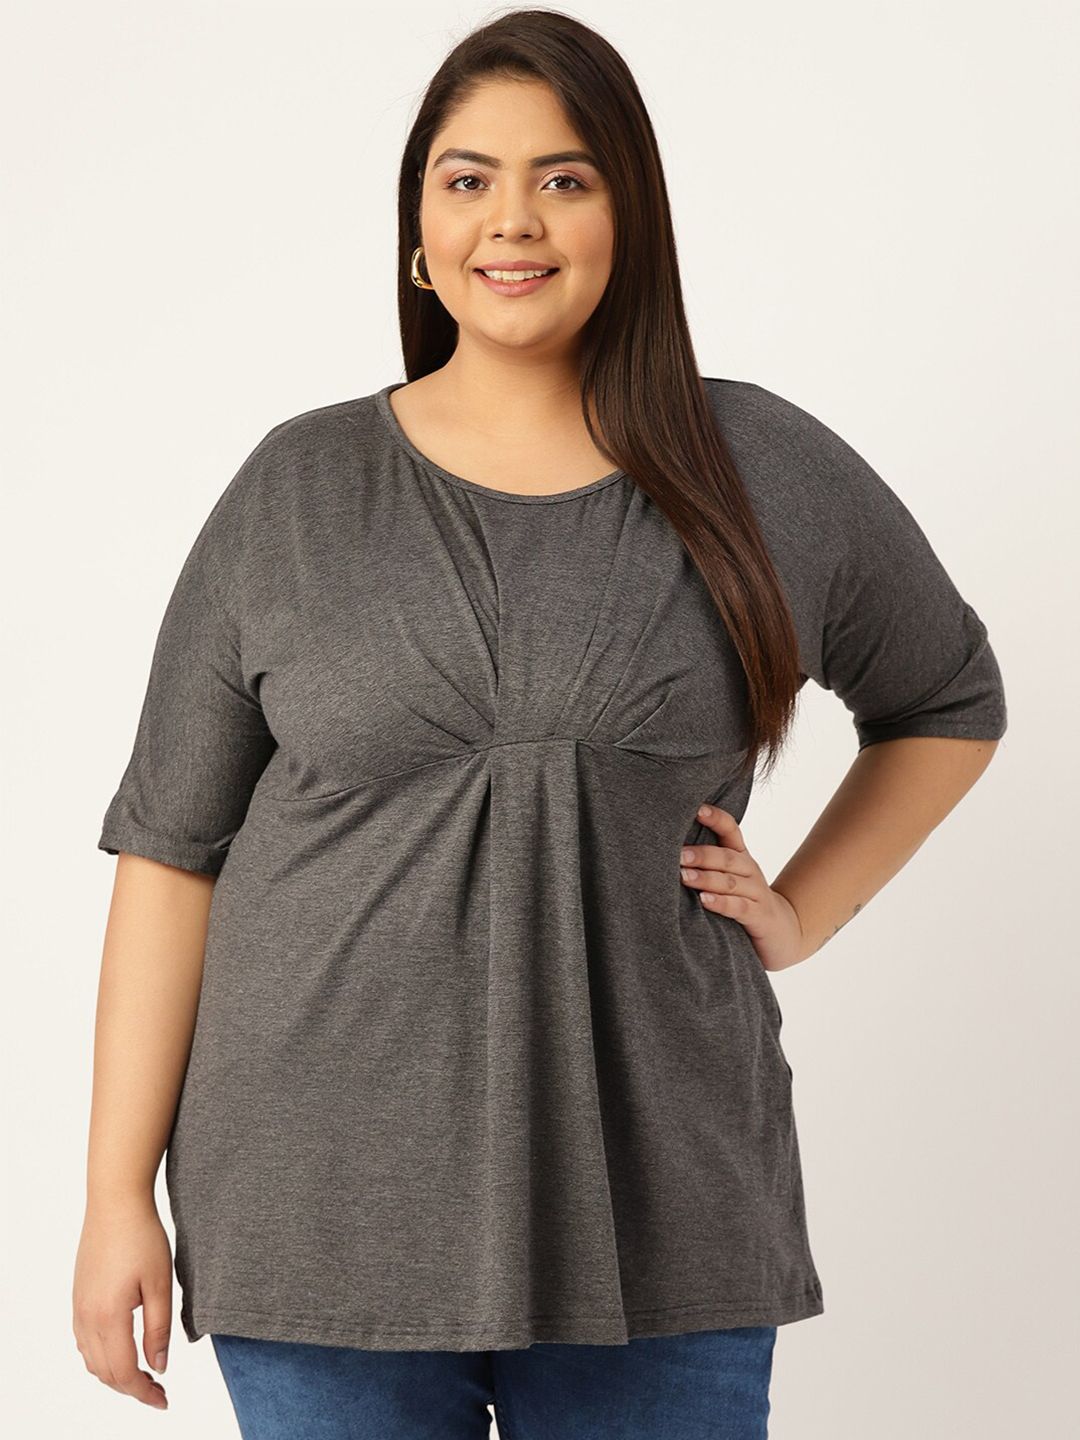 theRebelinme Women Plus Size Charcoal Grey Solid Front Gather Knitted Top Price in India